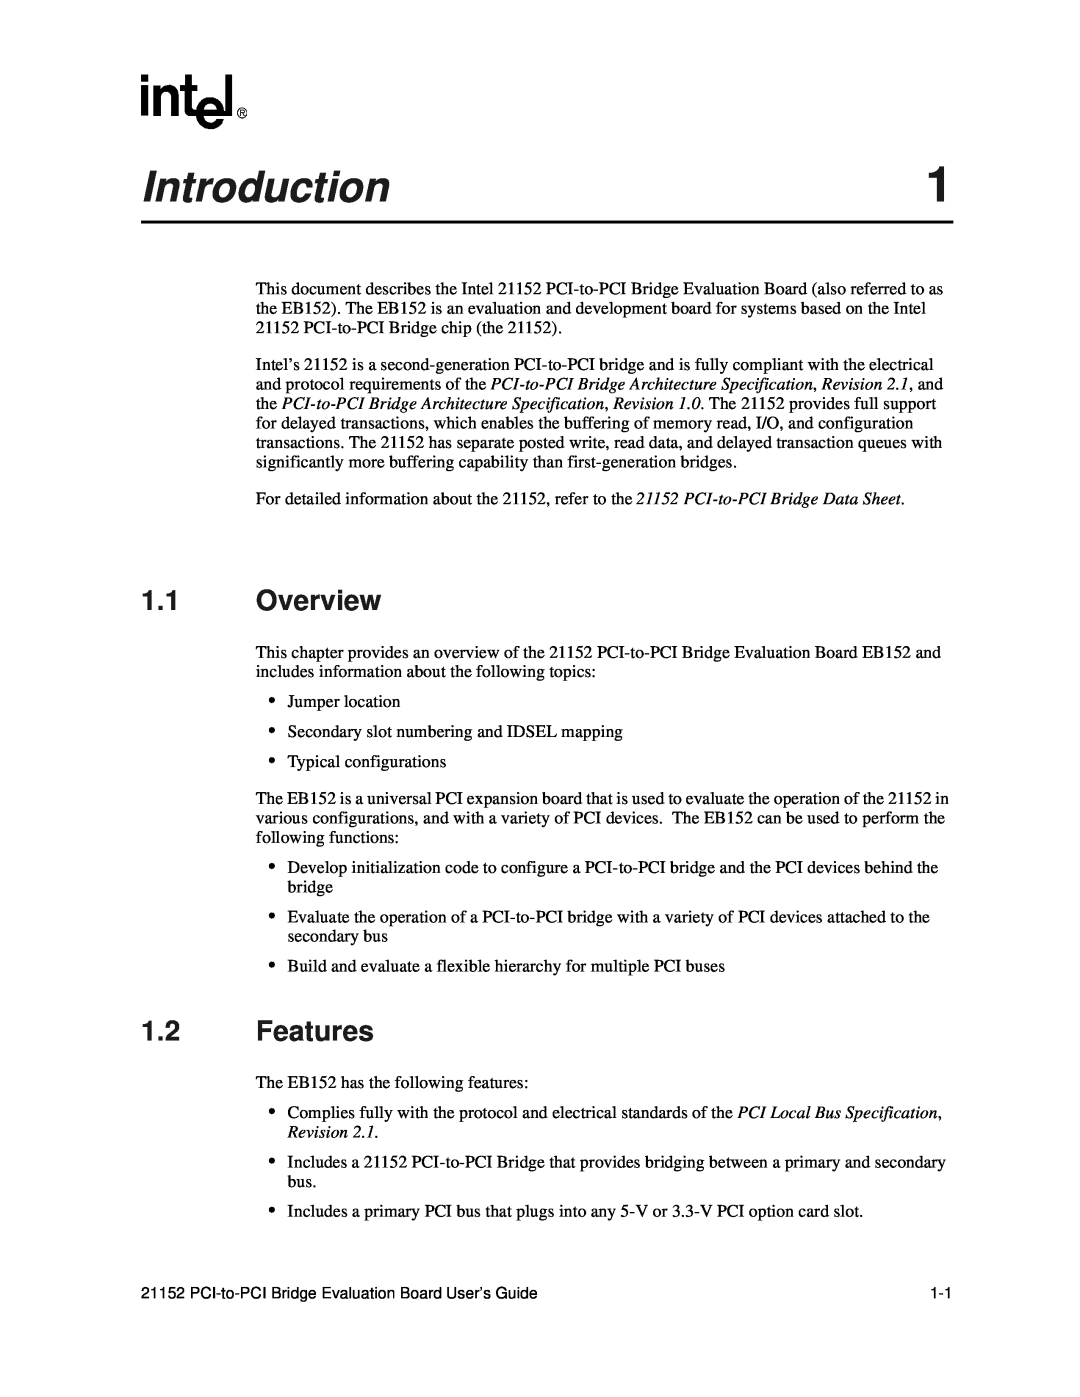 Intel 21152 manual Introduction, Overview, Features 